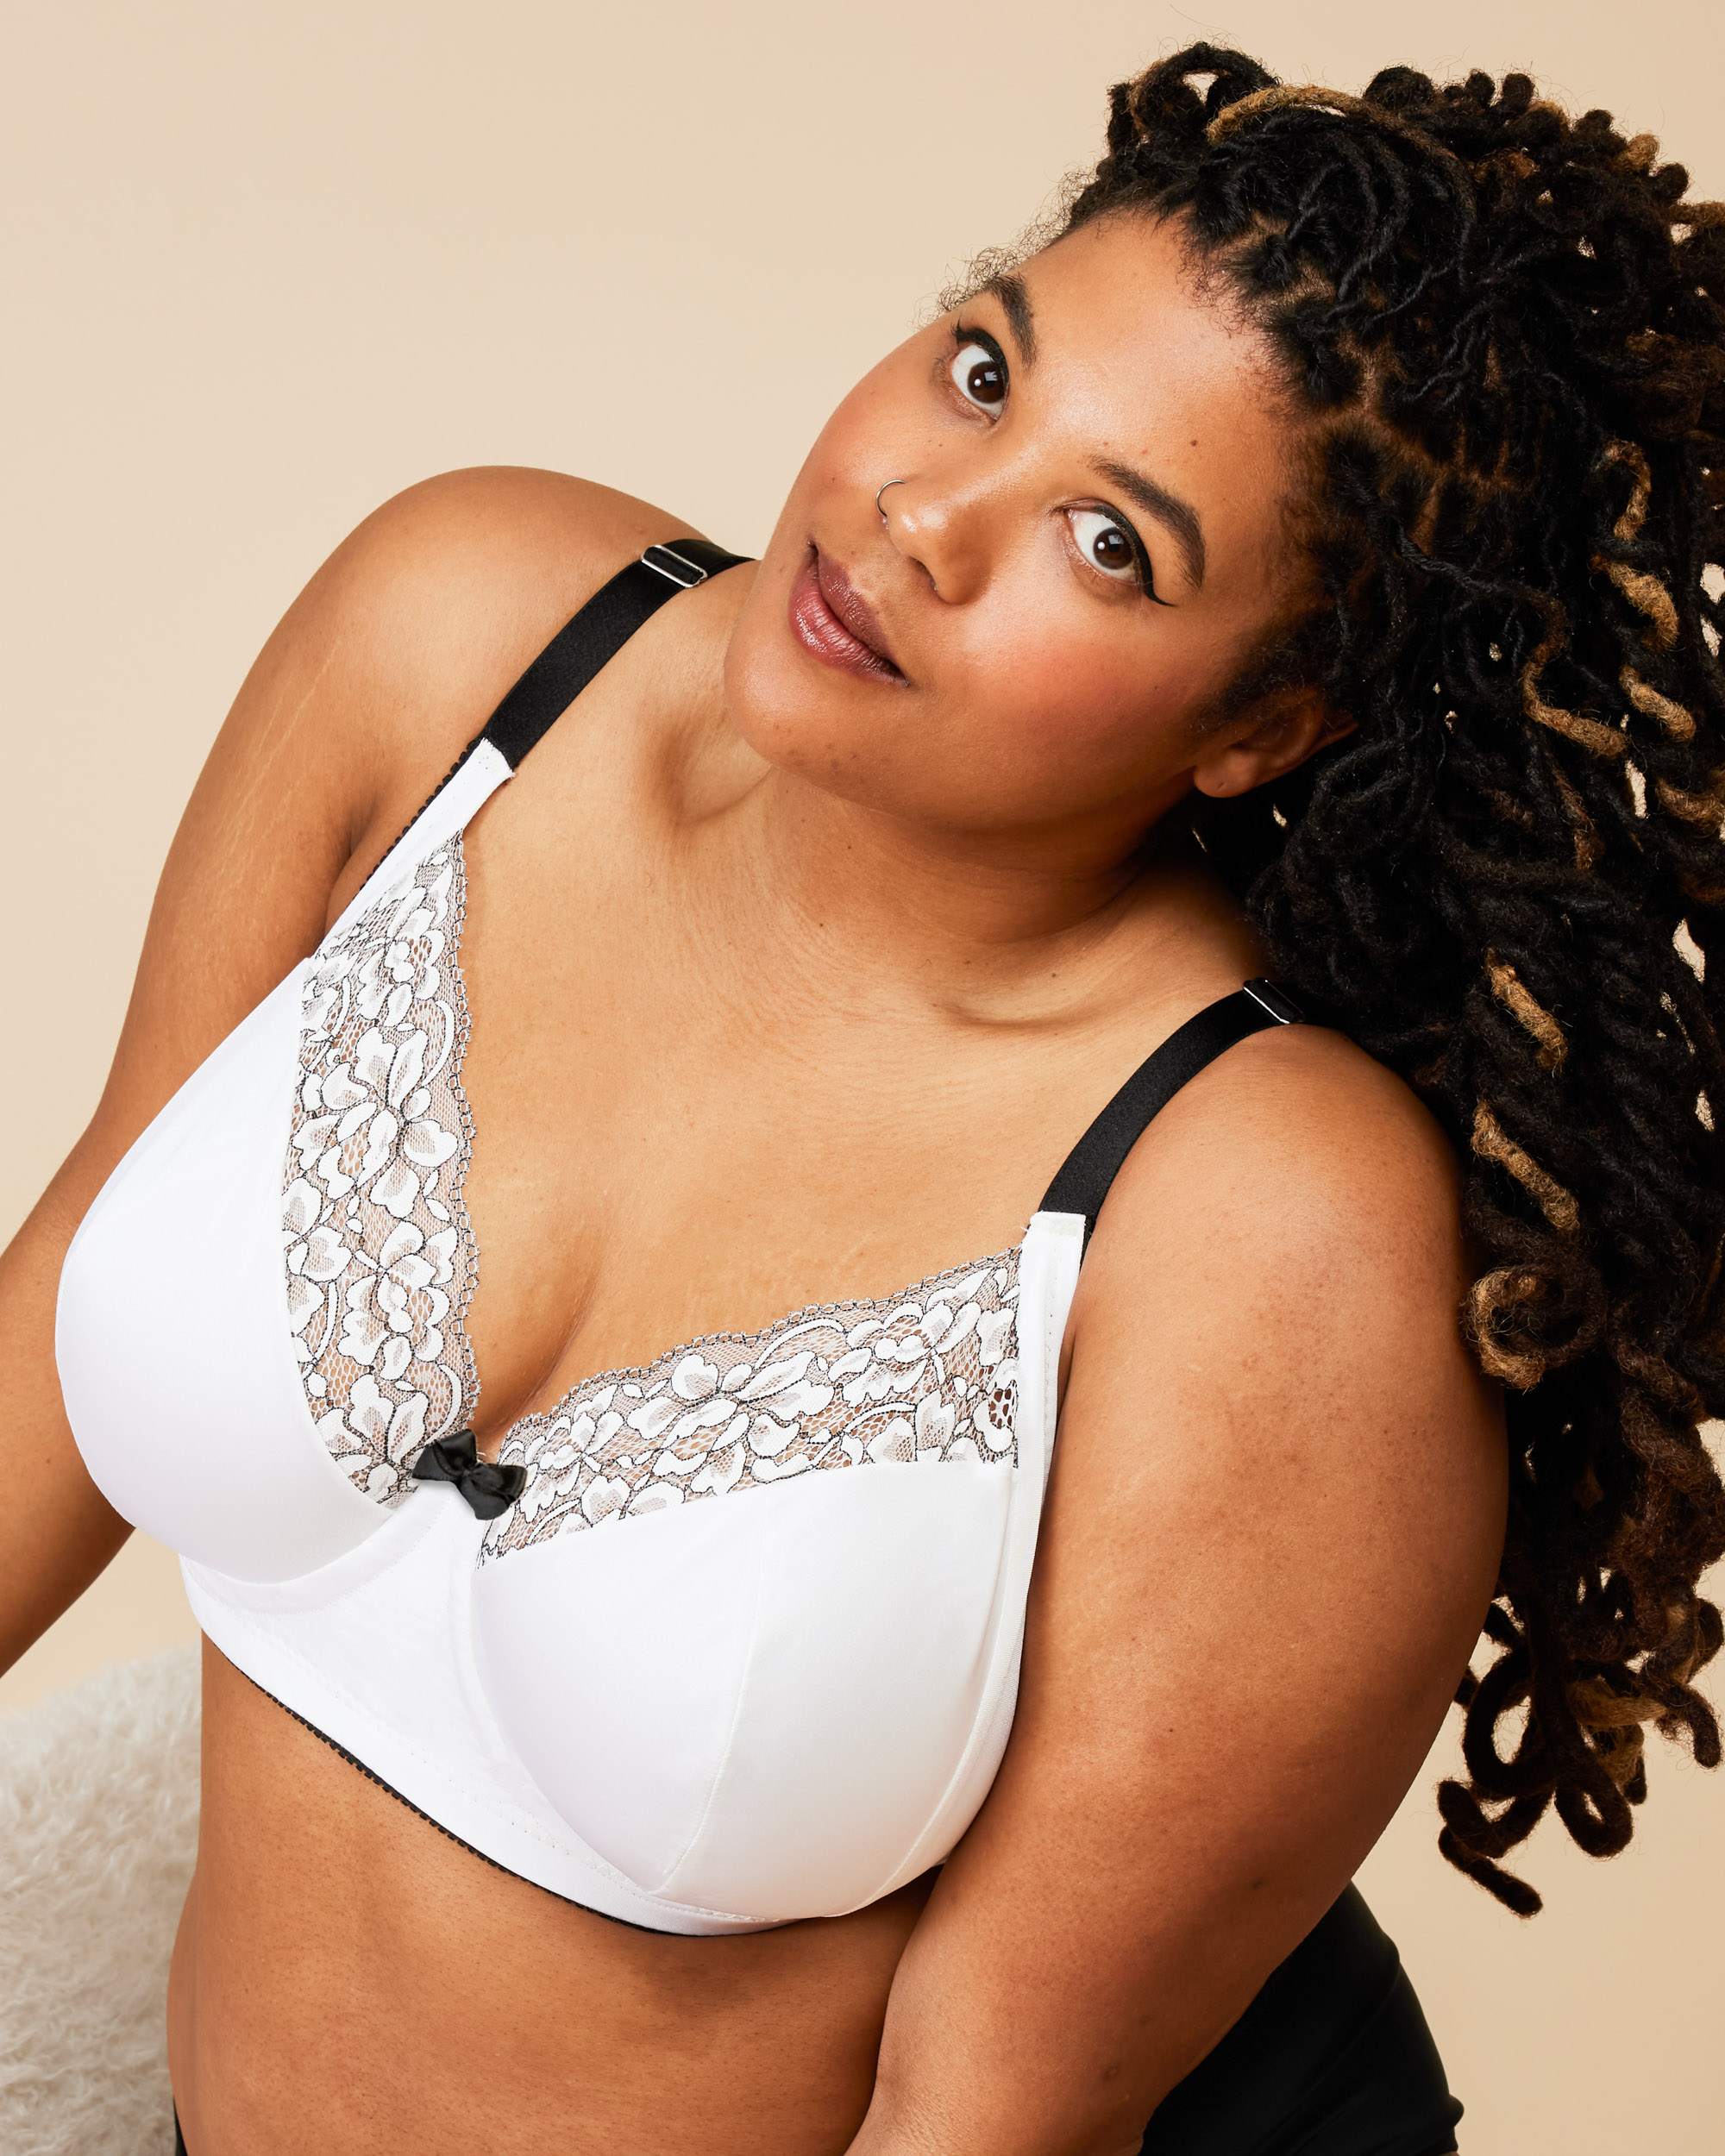 MJTrends: Bra Wire: a-b cup size